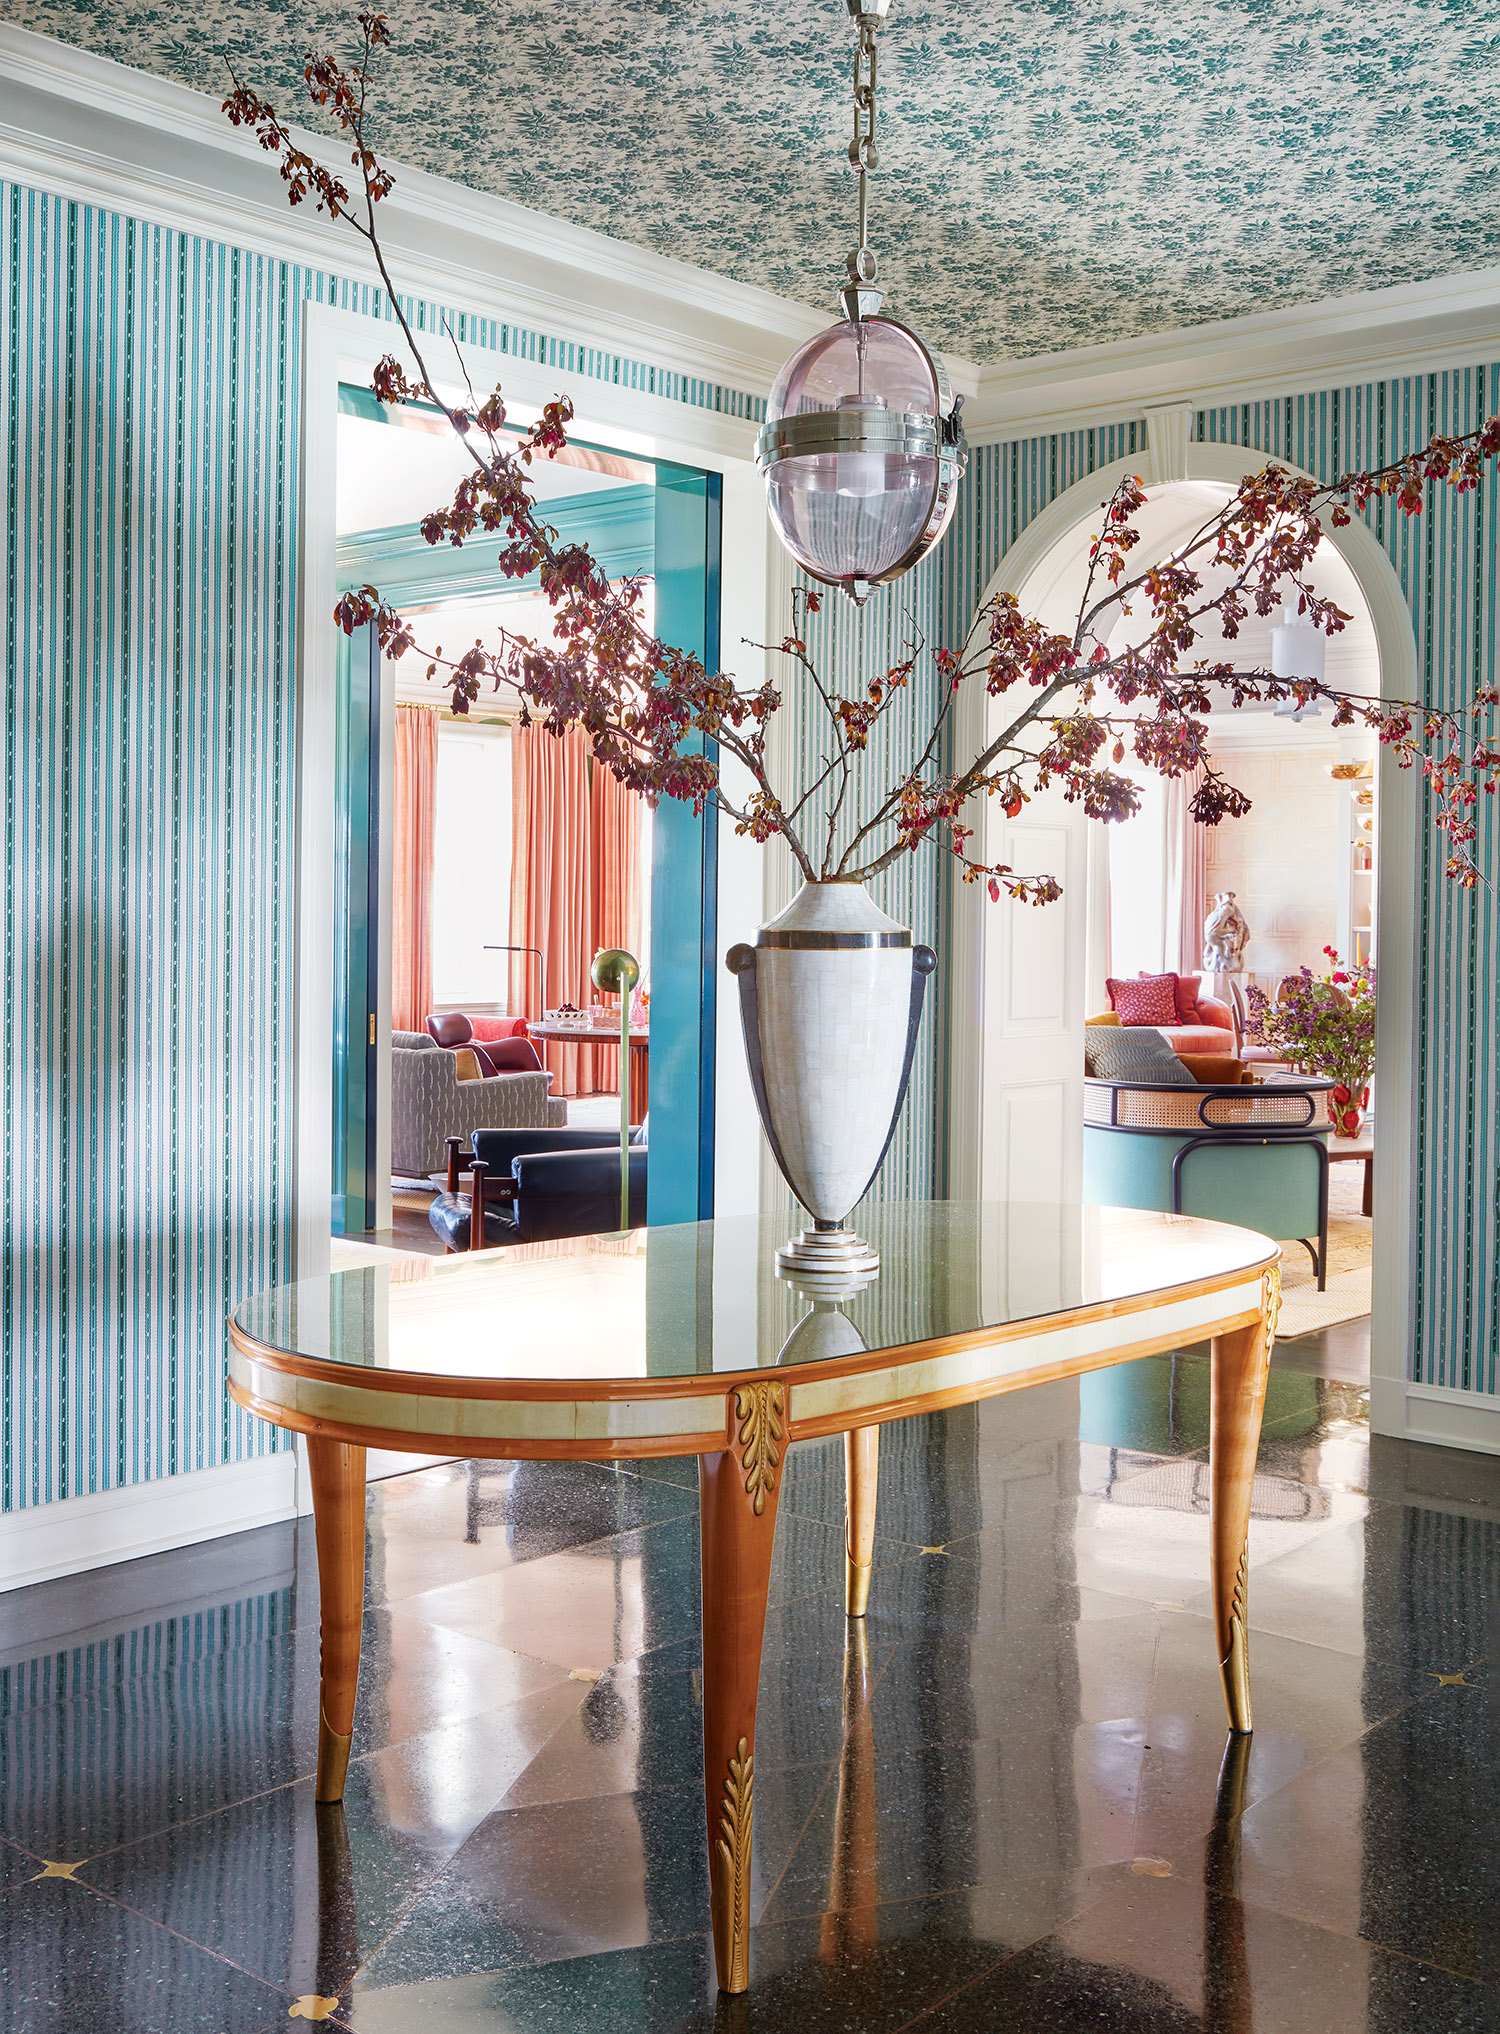 Foyer with vase of cherry blossom branches